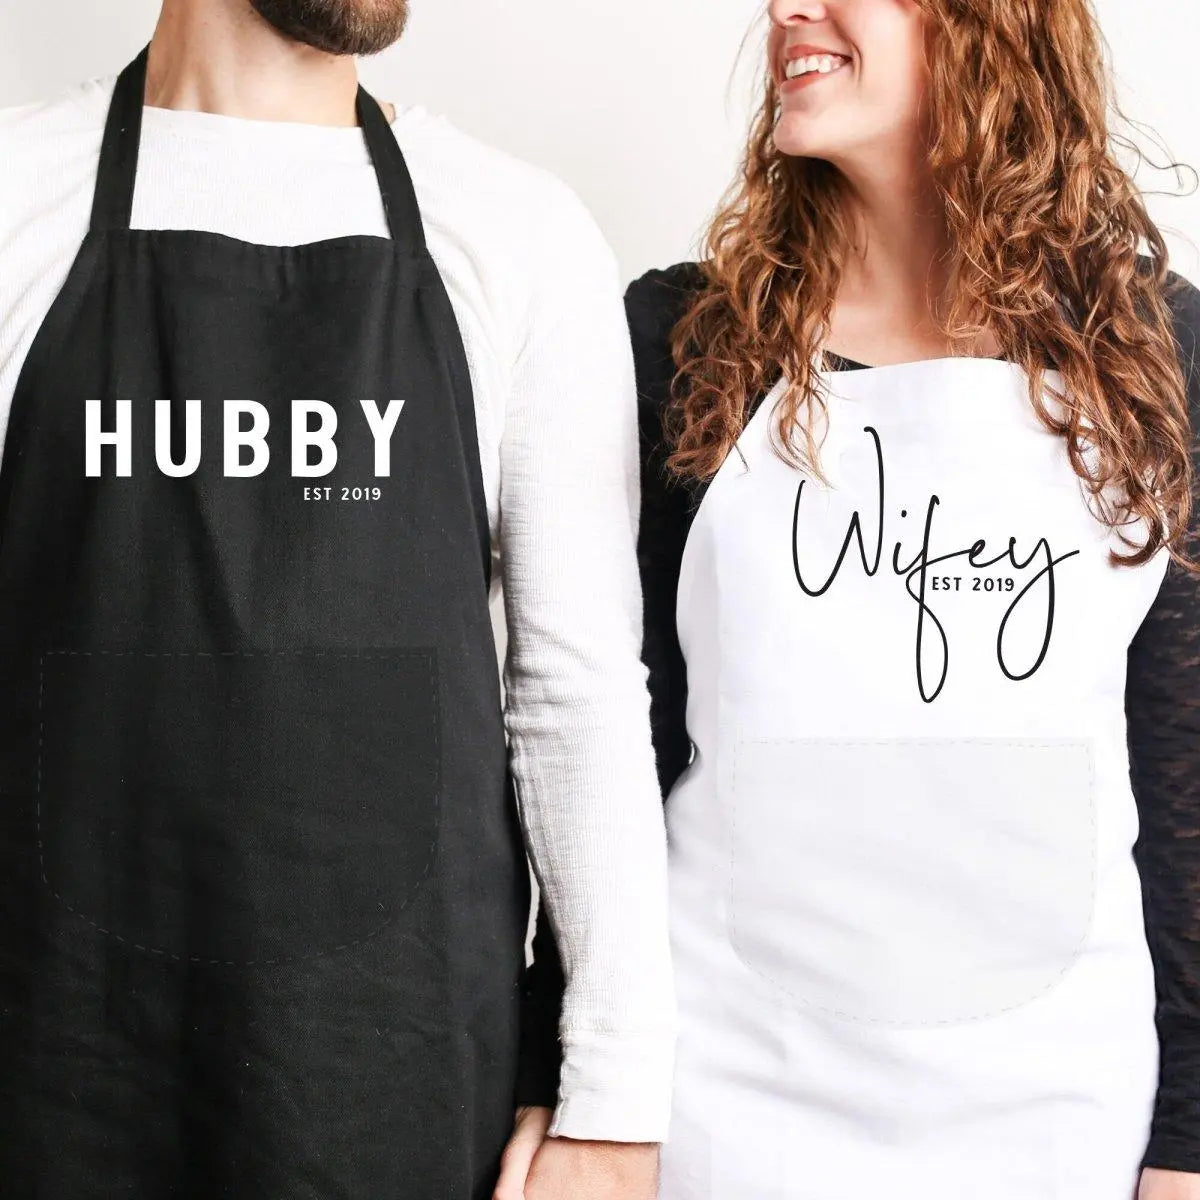 Personalised Wedding Aprons, Bride Groom Wedding Aprons, Newlywed Aprons, Mr and Mrs Aprons, Mr and Mrs Gifts, Newlywed Mr Mrs Home Gift, - Amy Lucy